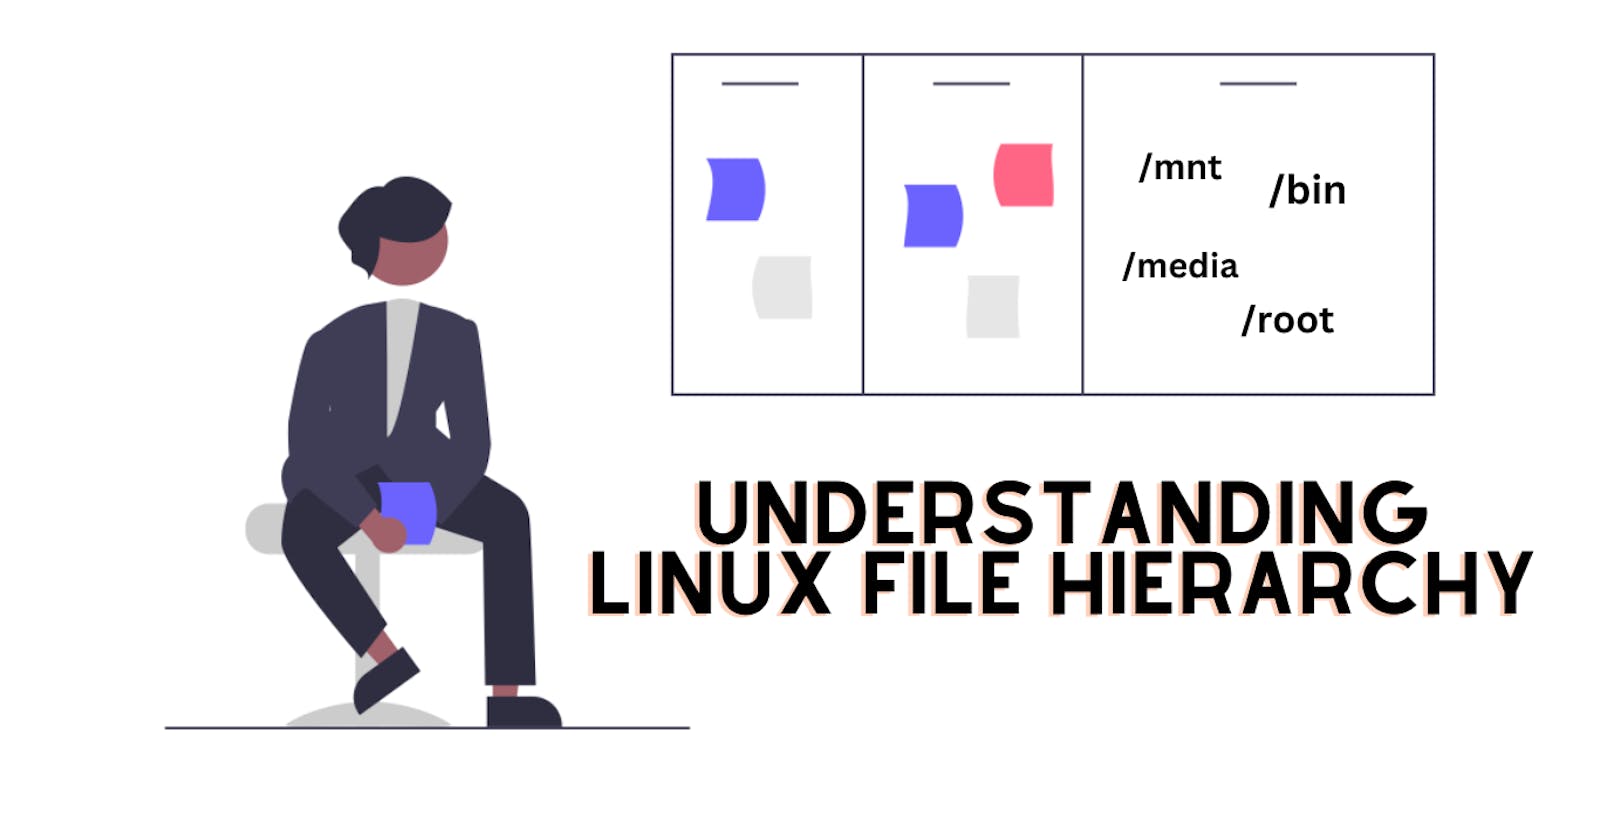 Understanding and exploring Linux File Hierarchy